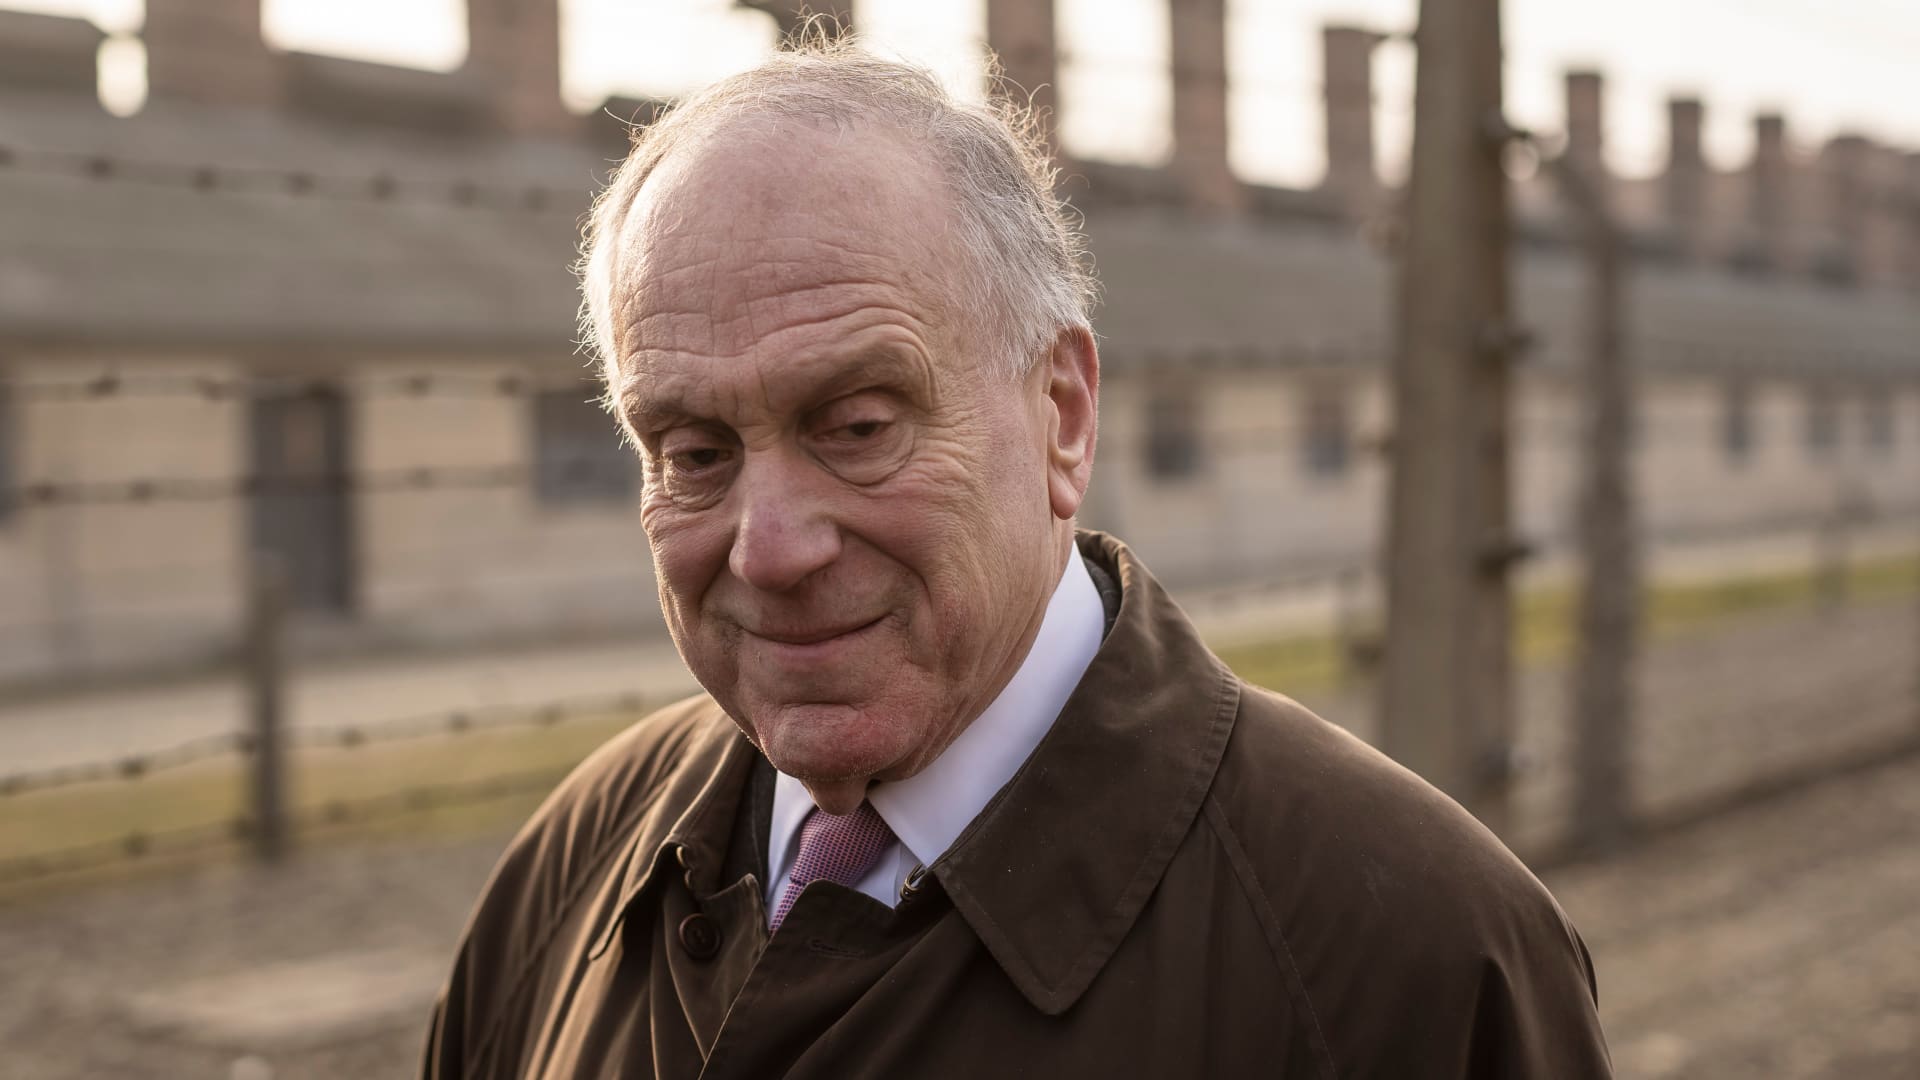 Ronald Lauder, president of the World Jewish Congress, is seen at Nazi death camp Auschwitz-Birkenau on Jan. 26, 2020, one day before the 75th anniversary of its liberation.